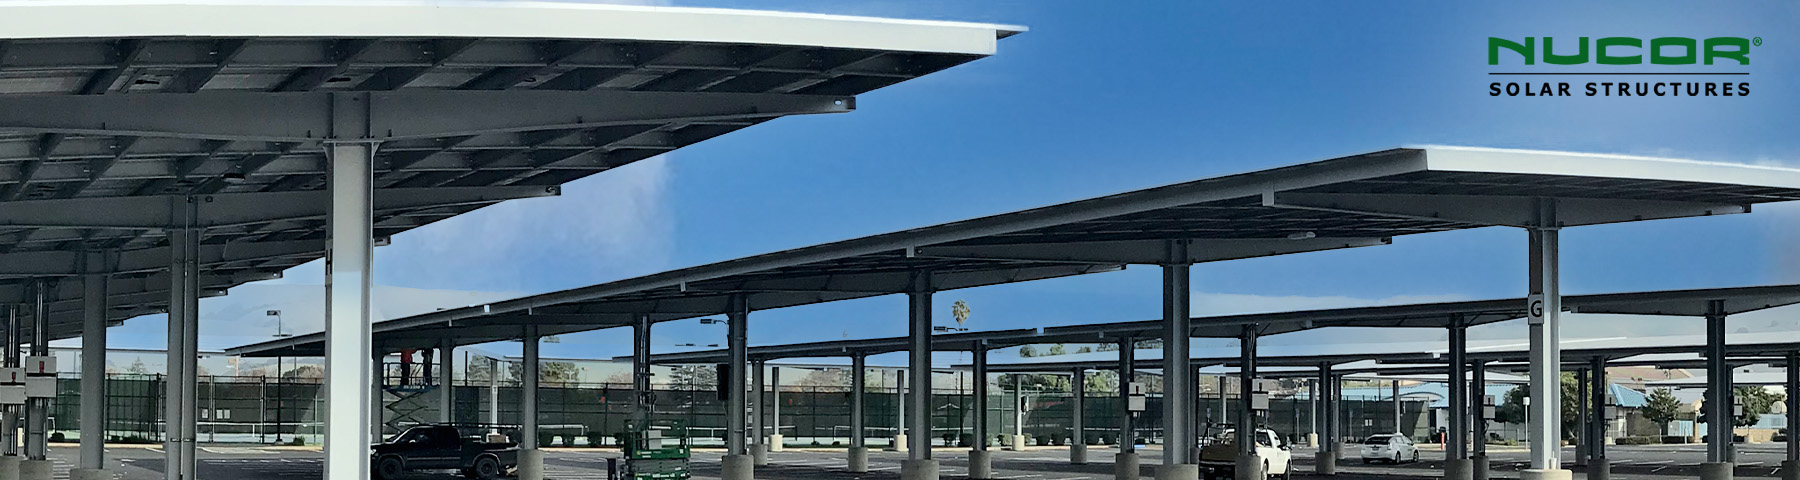 Steel Solar Panel Structures by NBG